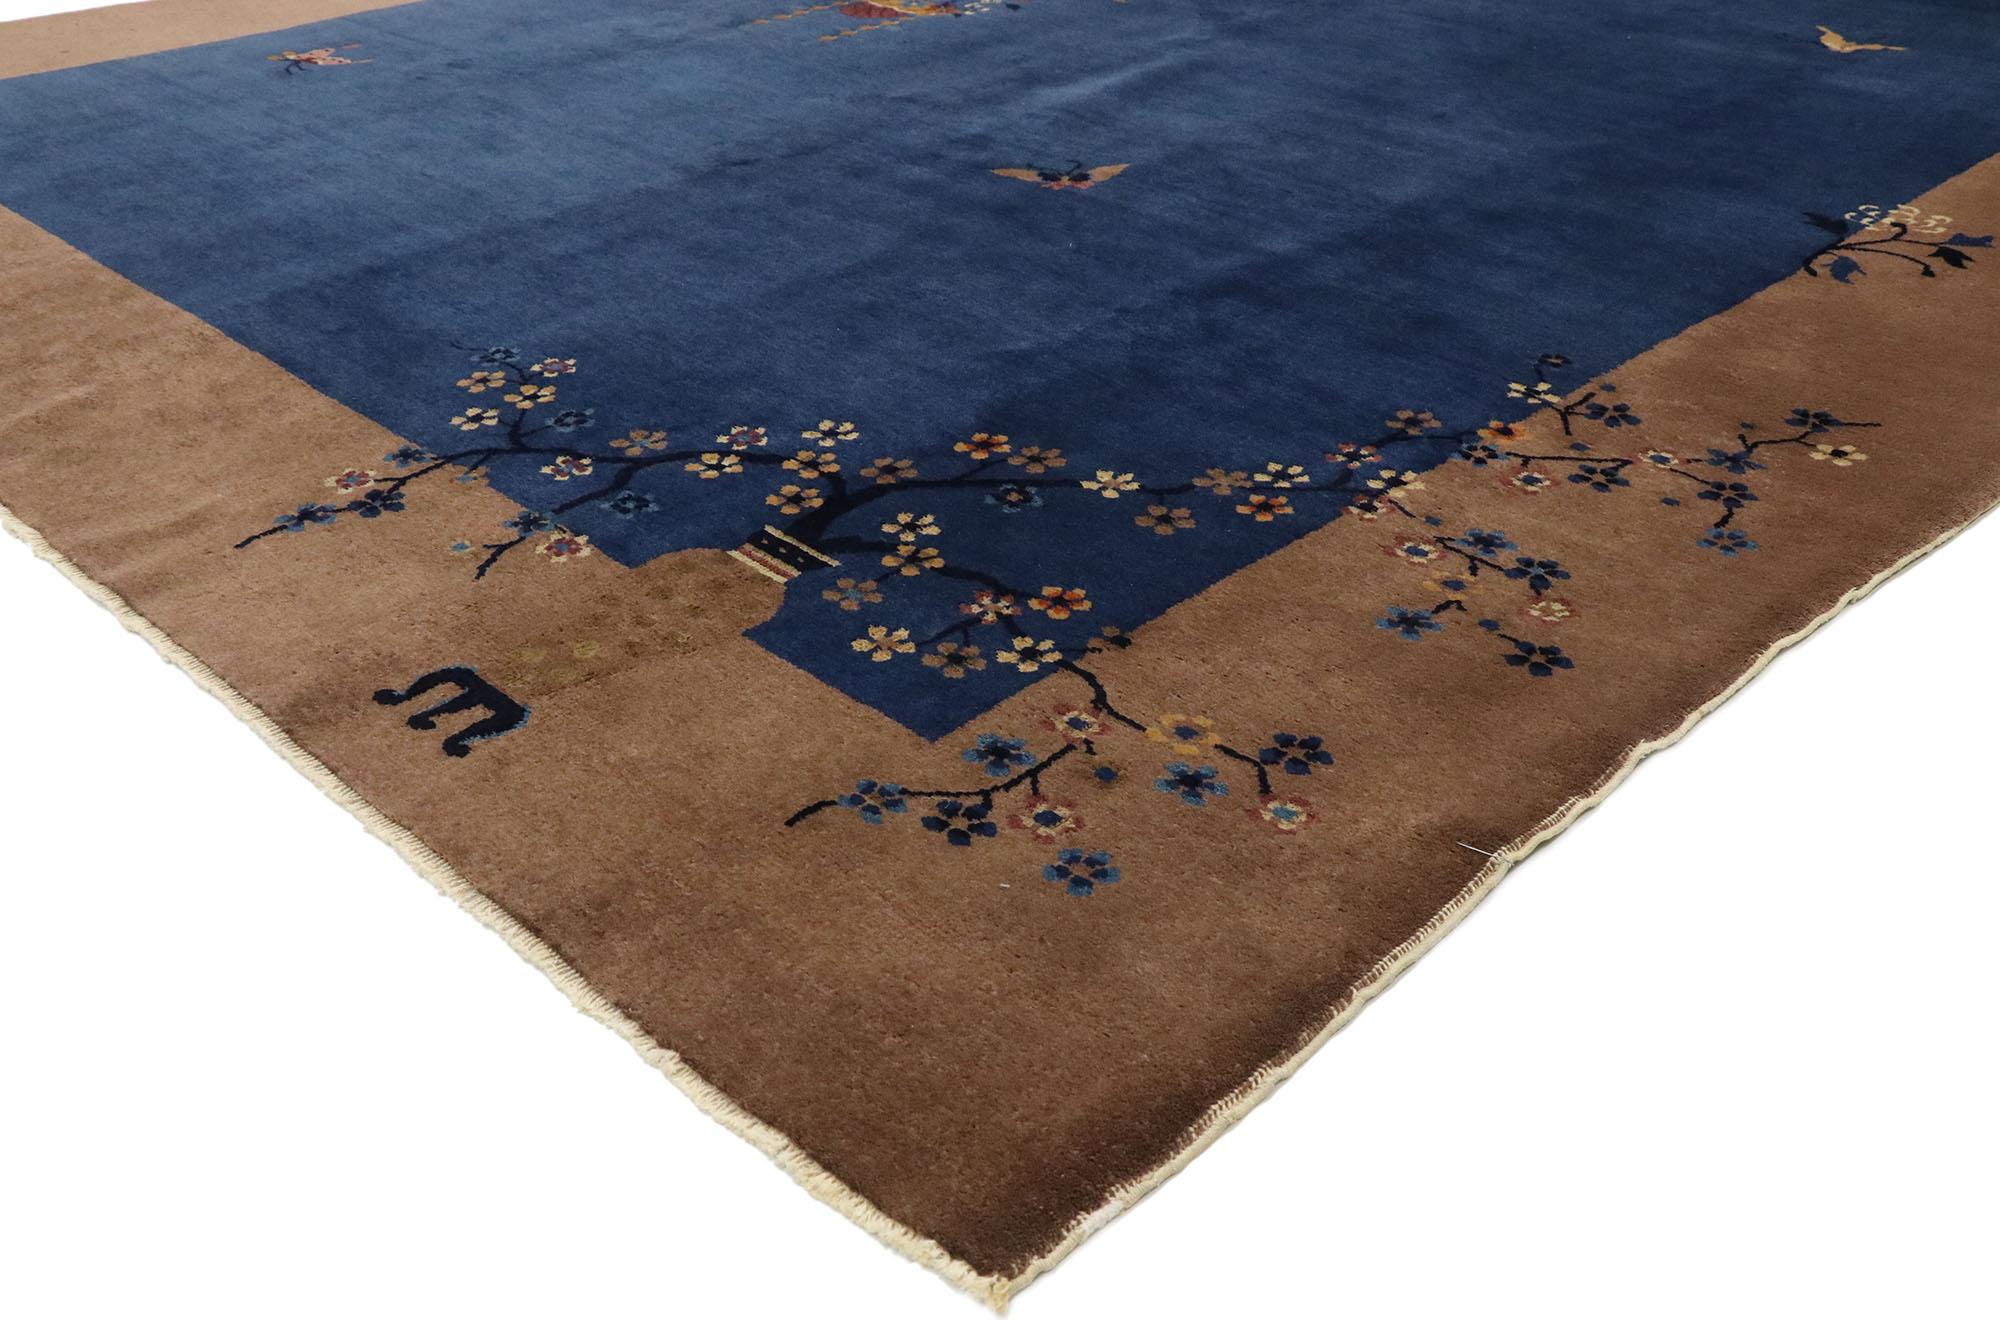 77449, antique Chinese Art Deco rug with Ming Dynasty style. This hand knotted wool antique Chinese Art Deco rug features a color-blocked field and border scheme festooned with asymmetrical florals in opposite corners across the composition,